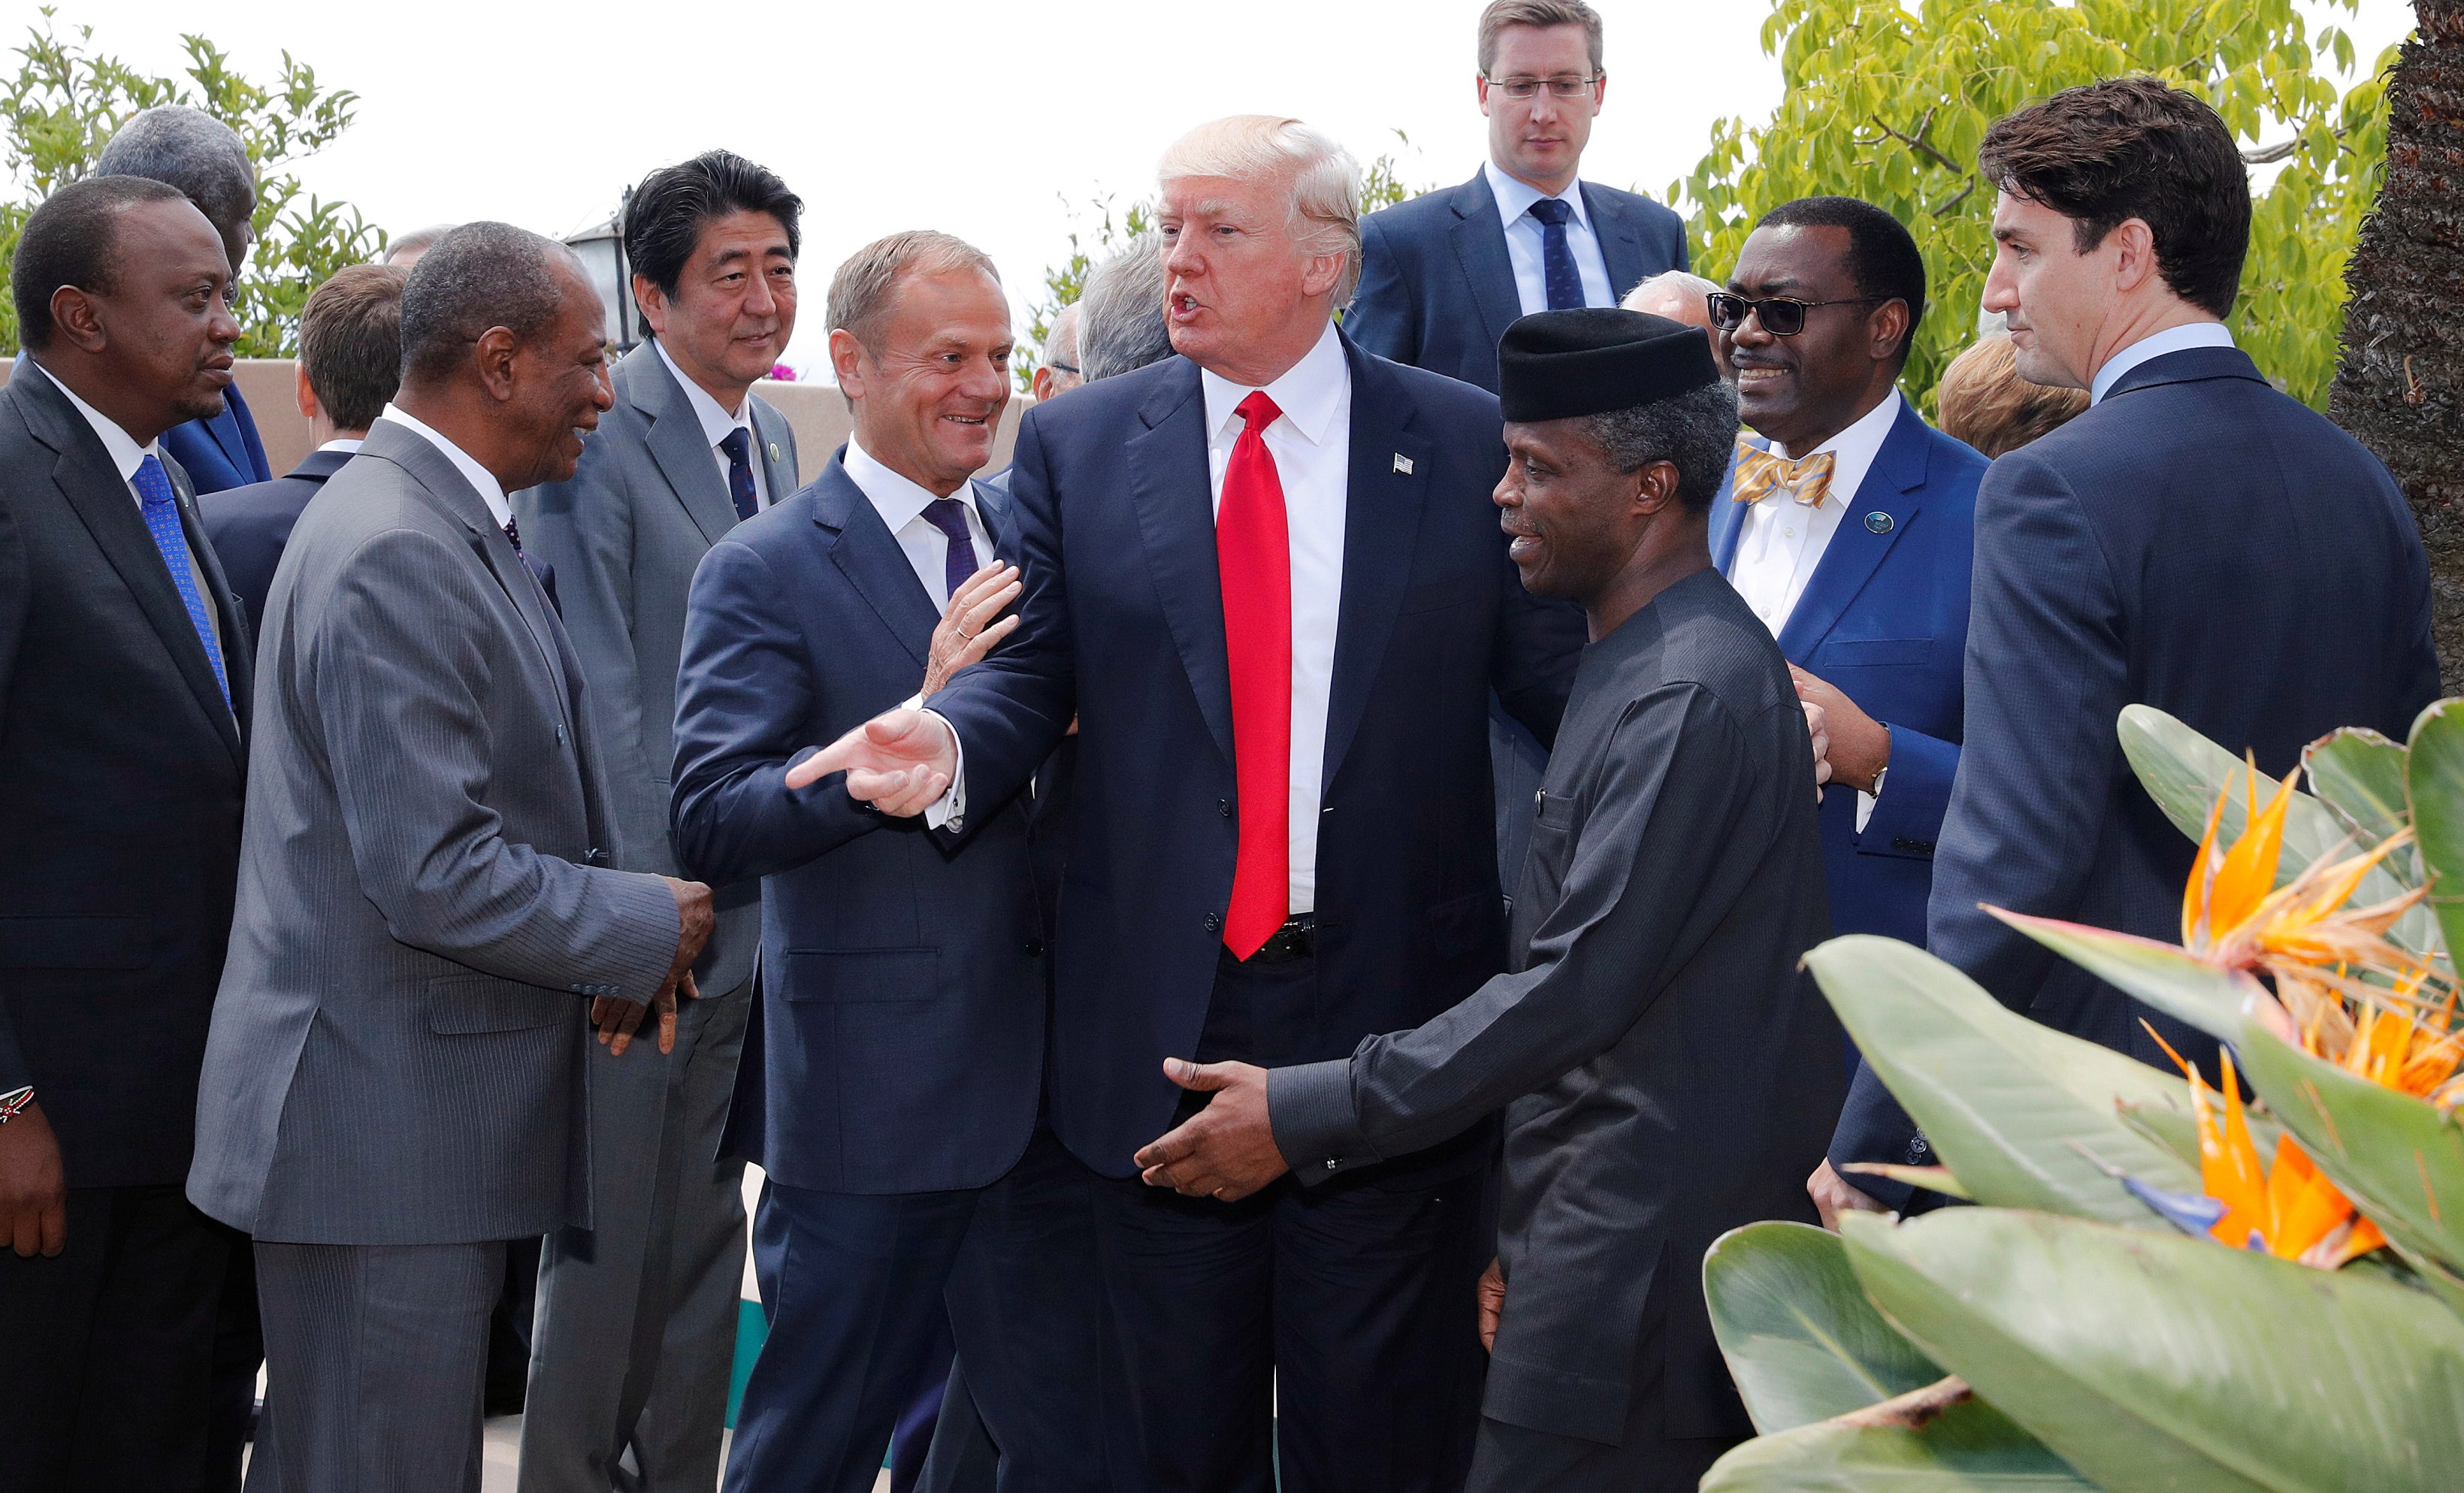 U.S. President Donald Trump poses with African leaders after the family photo at the end of the expanded session at the G7 Summit in Taormina